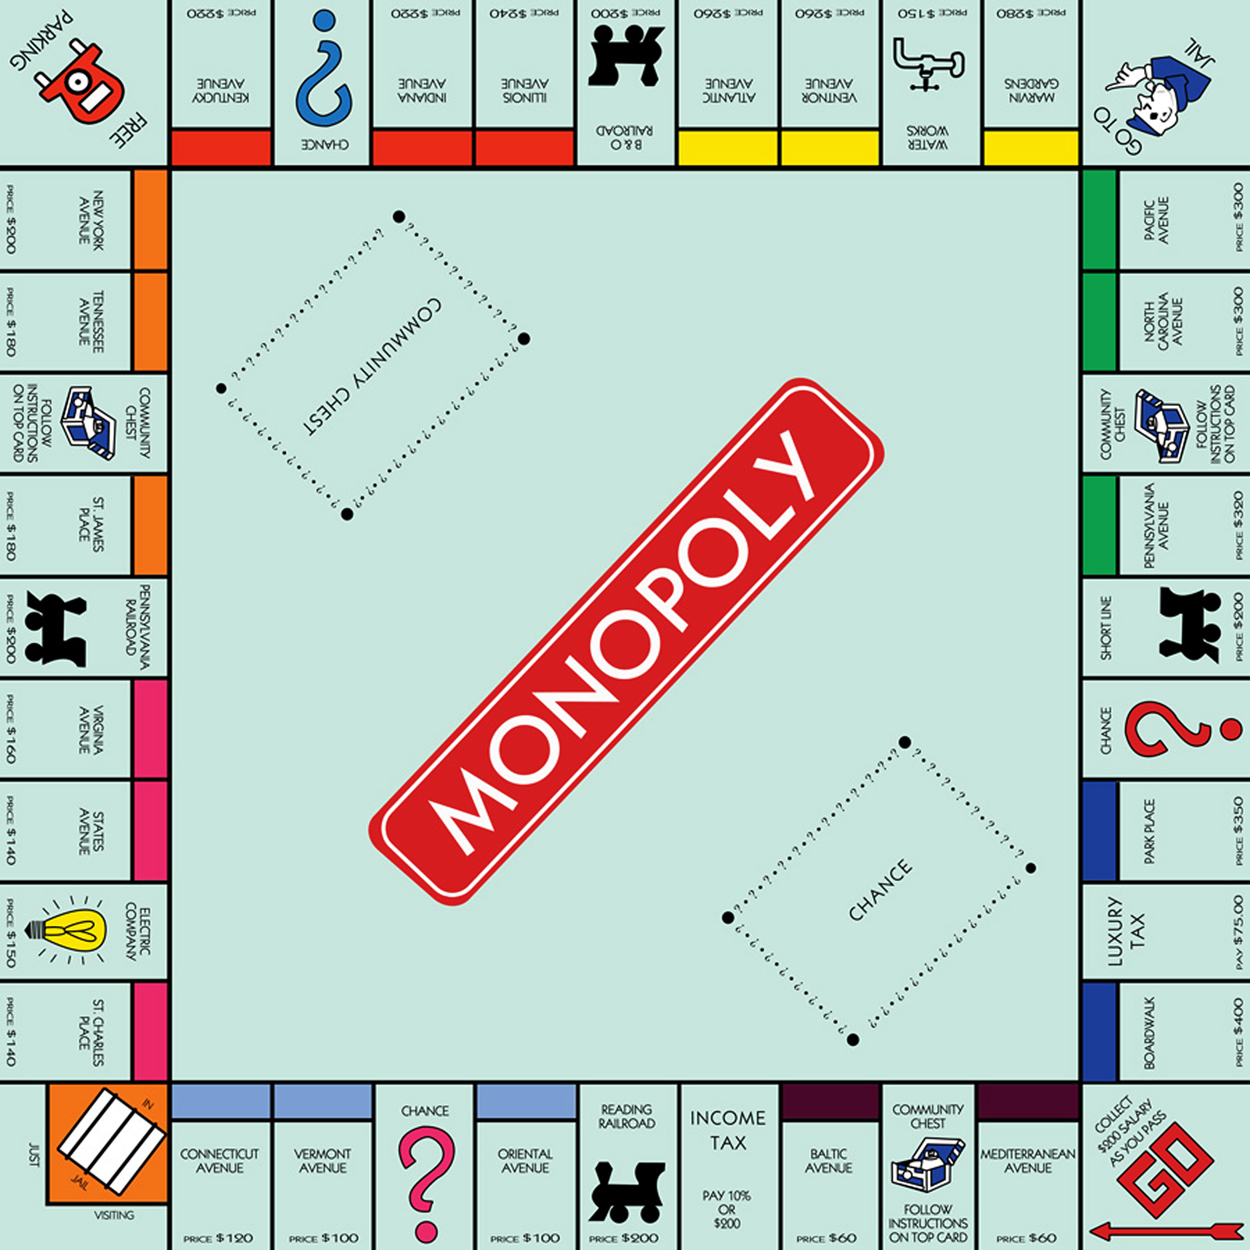 the board game monopoly was originally rejected